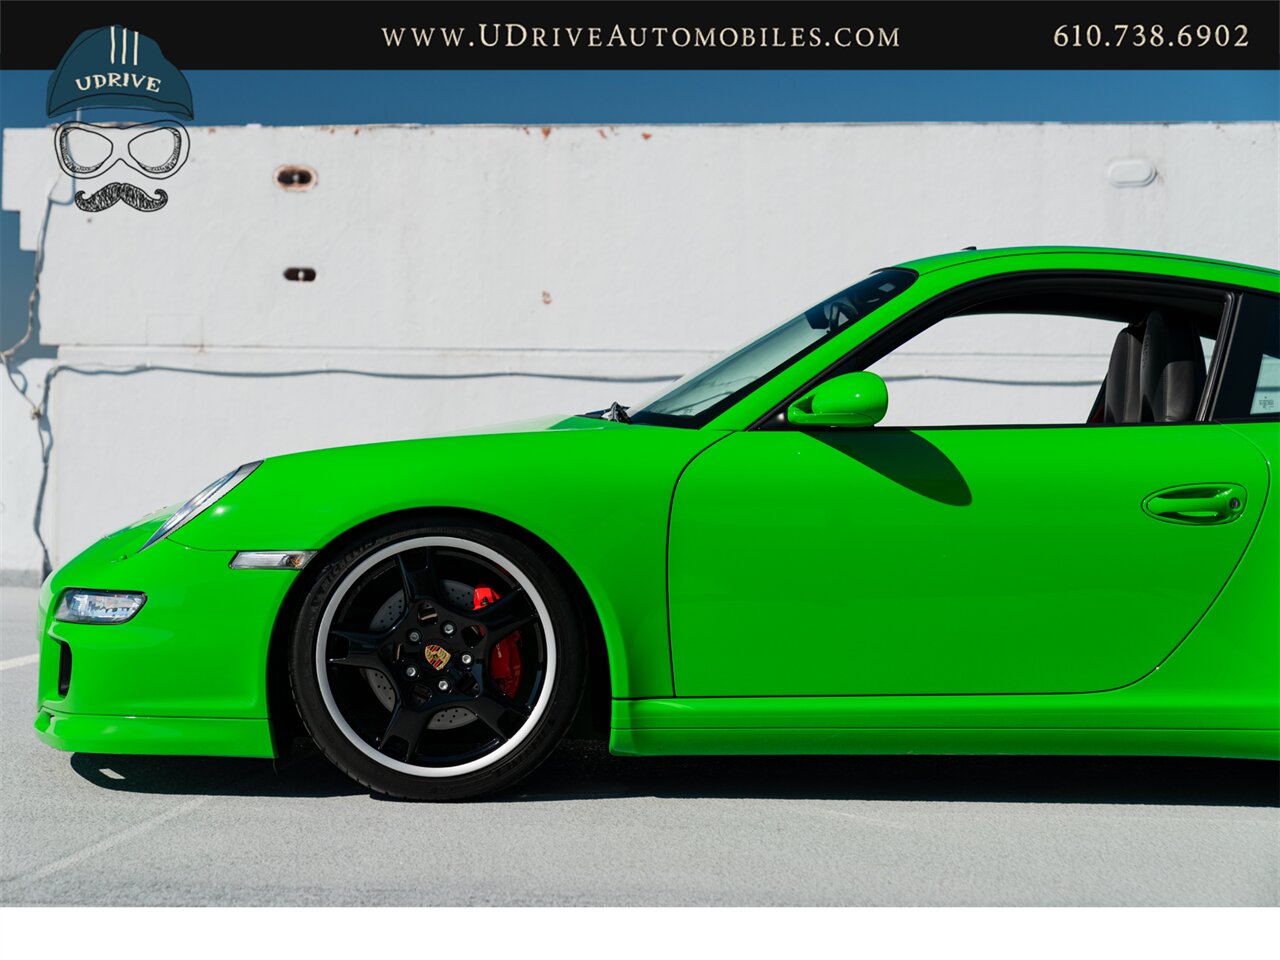 2006 Porsche 911 Carrera 4S  997 PTS Signal Green 6Sp Sport Sts Spt Chrono Spt Exhst - Photo 11 - West Chester, PA 19382